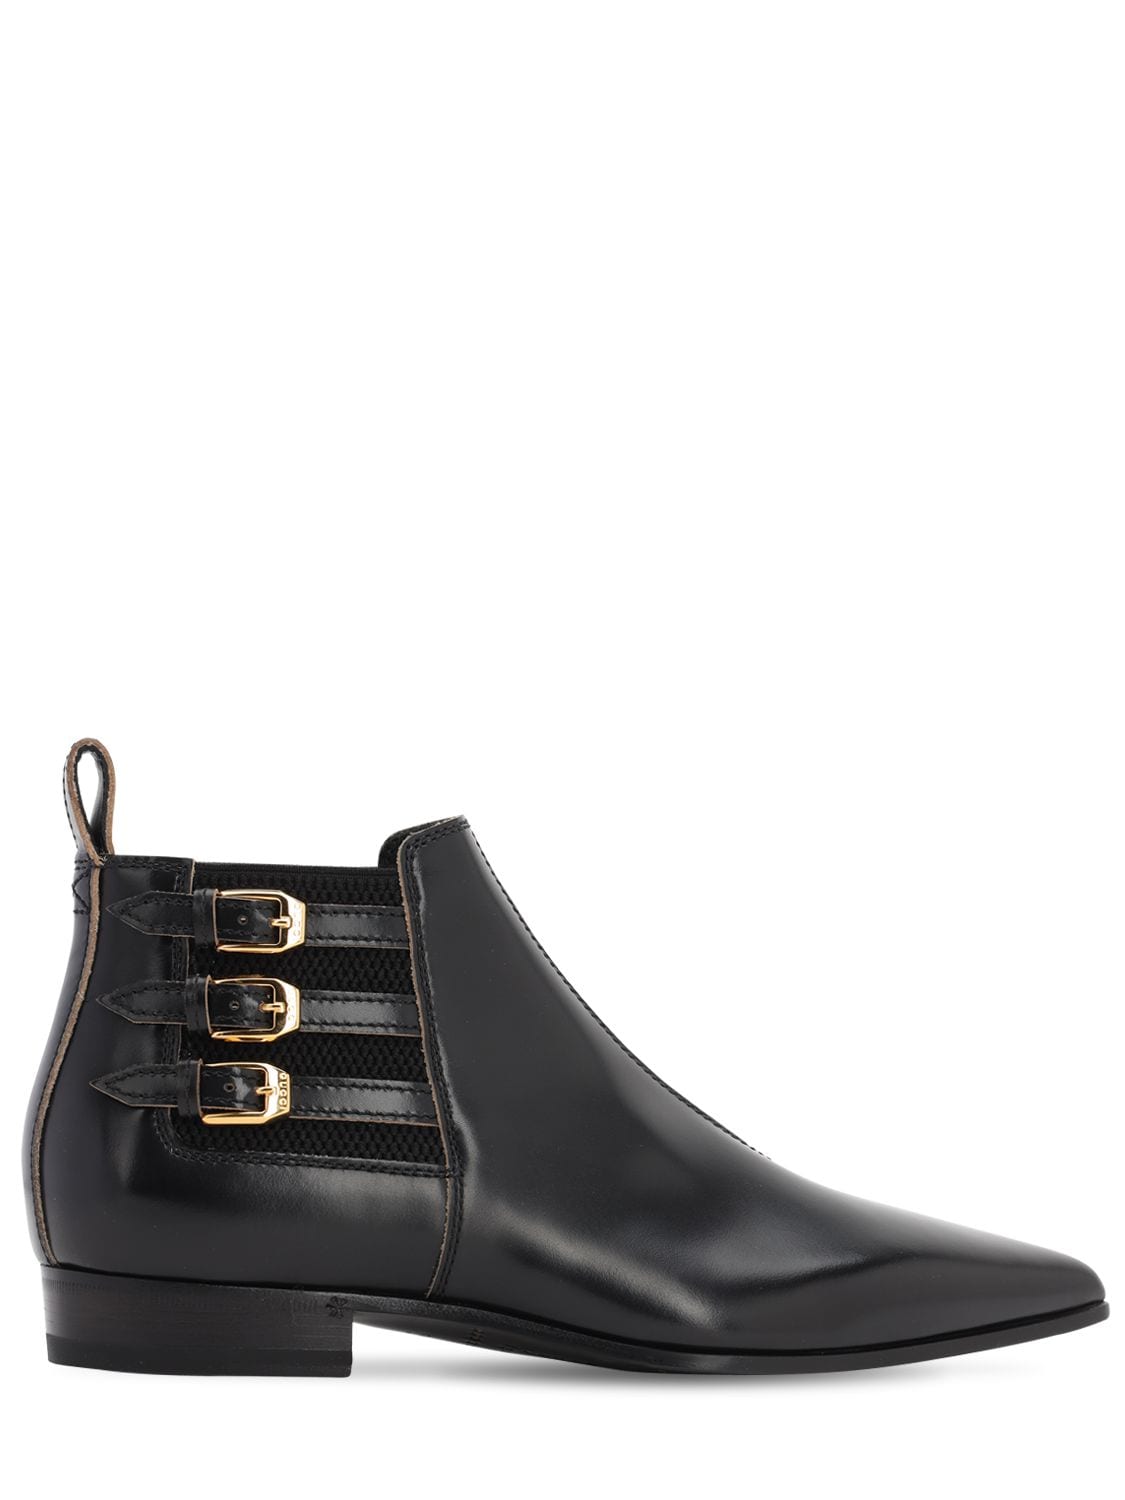 GUCCI 15MM QUEBEC LEATHER ANKLE BOOTS,71II9H028-MTAWMA2